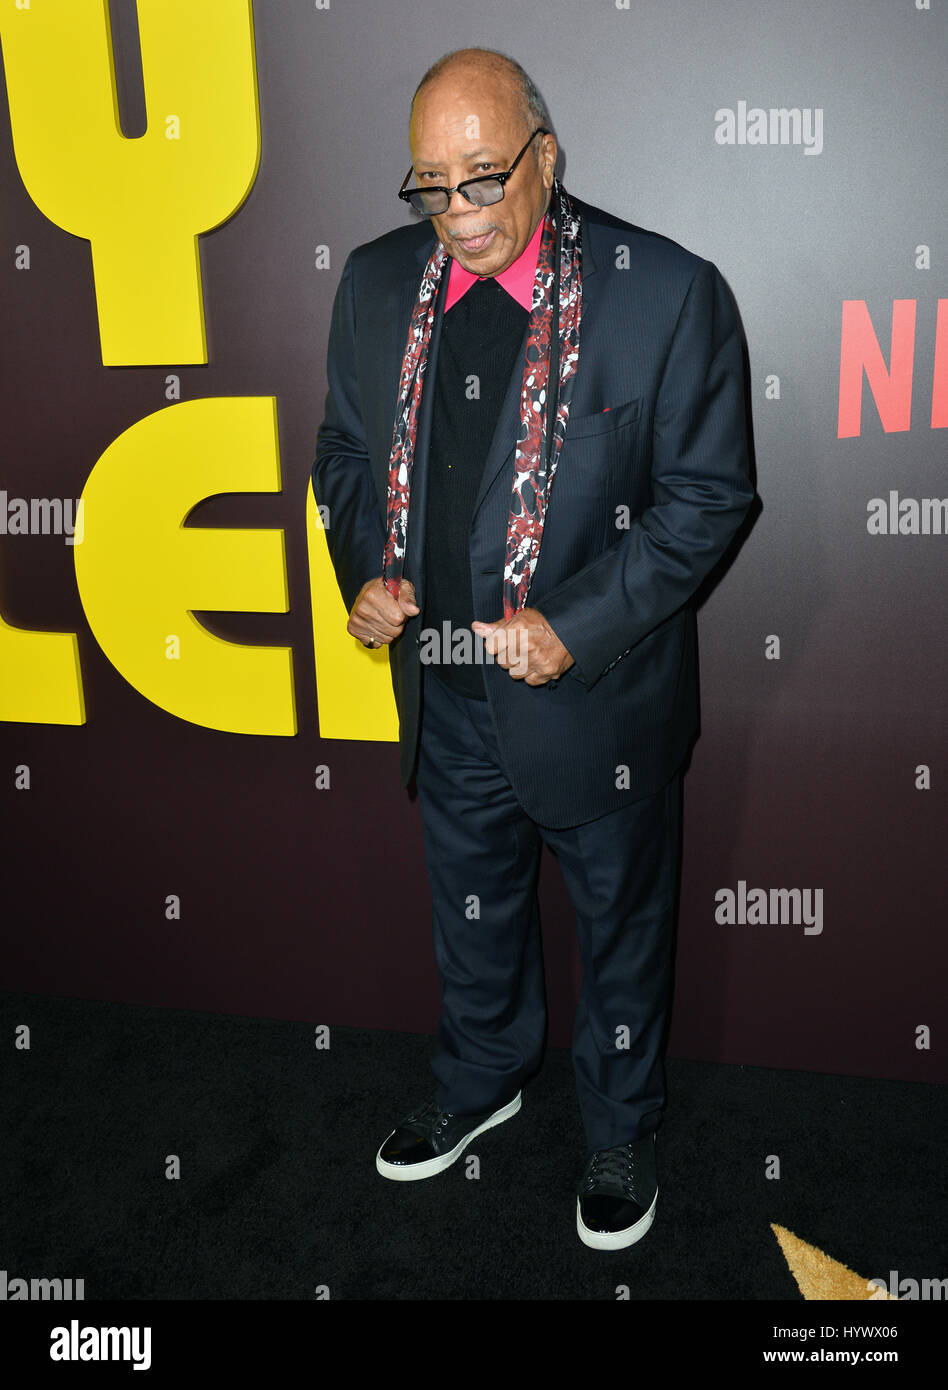 Los Angeles, USA. 06th Apr, 2017. Musician Quincy Jones at the premiere for 'Sandy Wexler' at The Cinerama Dome, Hollywood. Picture Credit: Sarah Stewart/Alamy Live News Stock Photo